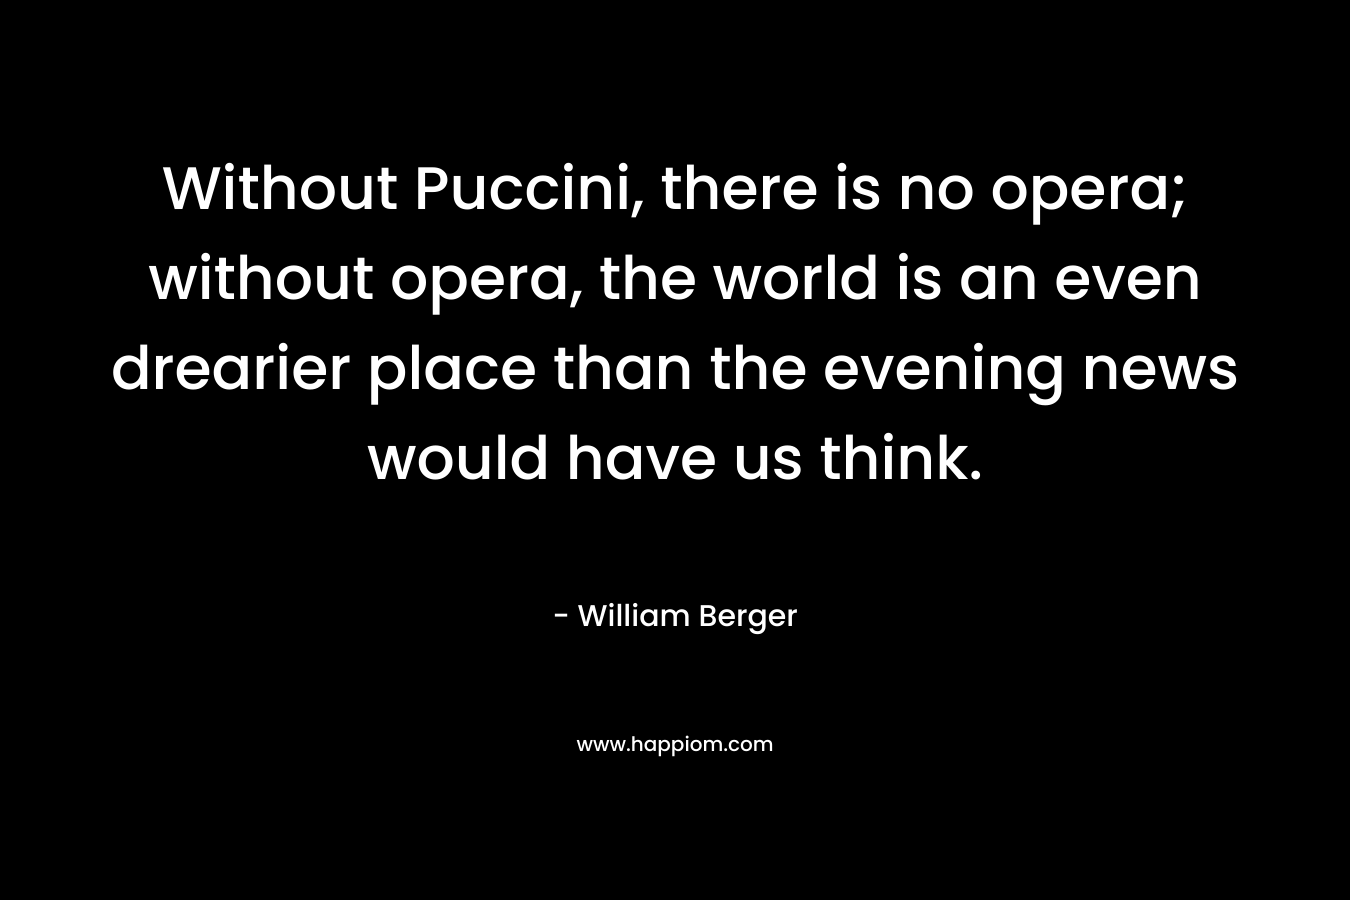 Without Puccini, there is no opera; without opera, the world is an even drearier place than the evening news would have us think. – William Berger